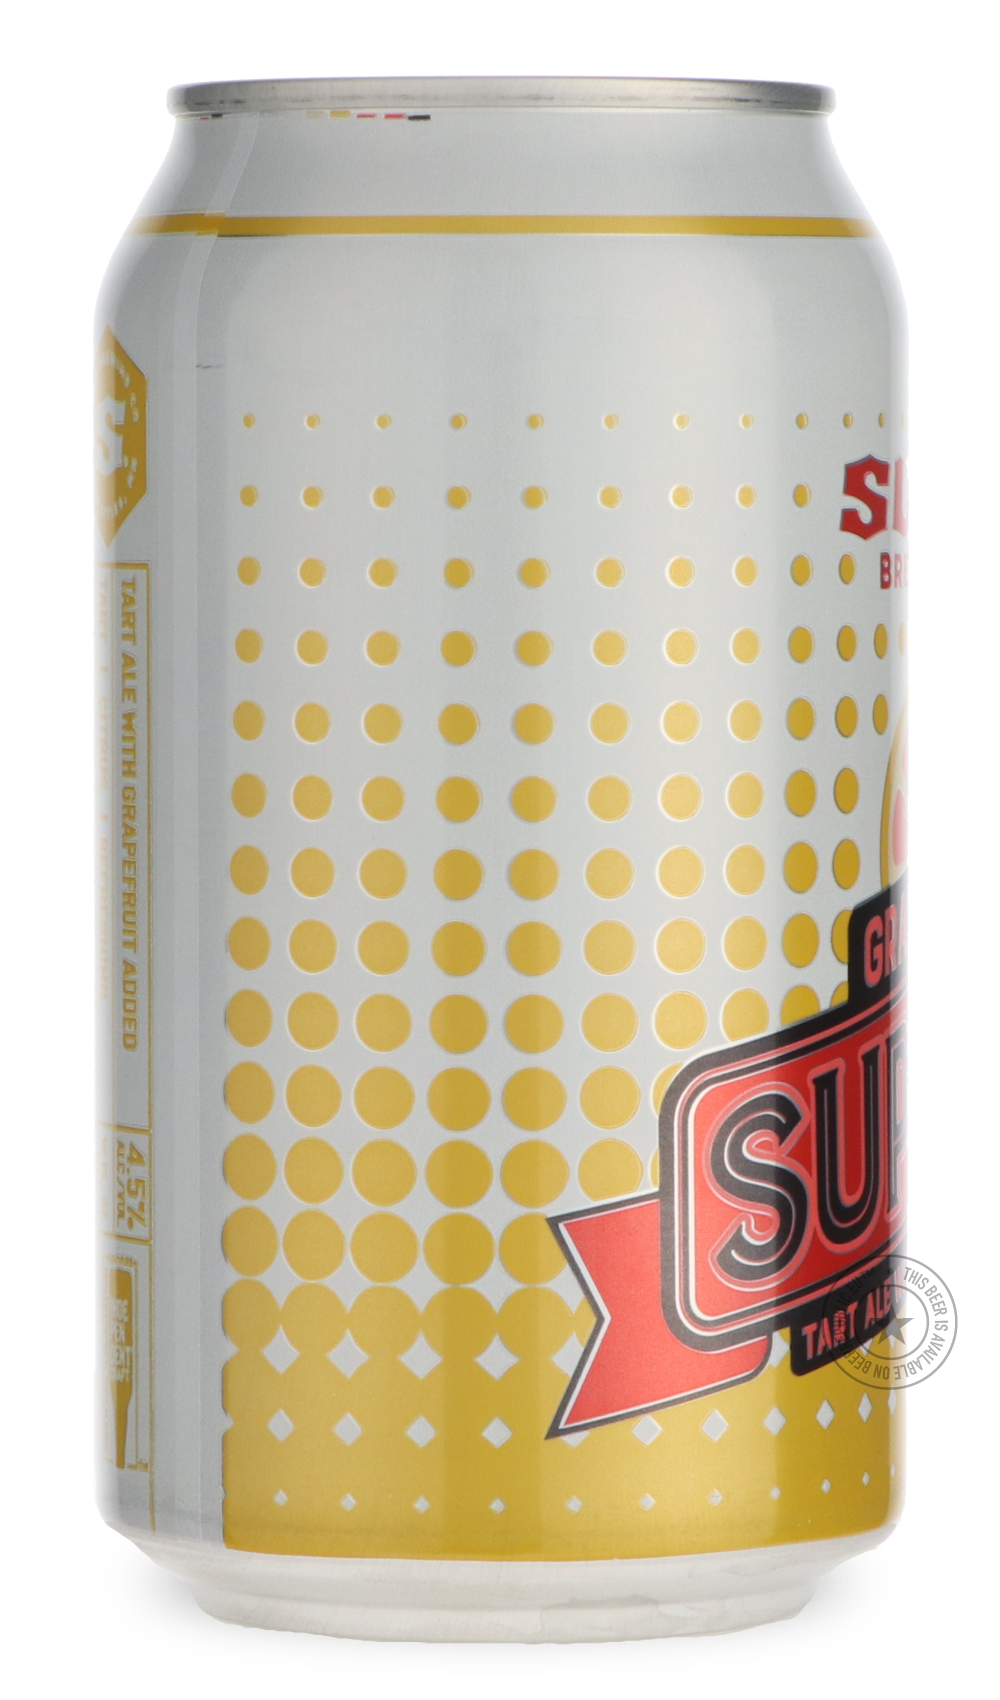 -Surly- Grapefruit Supreme-Sour / Wild & Fruity- Only @ Beer Republic - The best online beer store for American & Canadian craft beer - Buy beer online from the USA and Canada - Bier online kopen - Amerikaans bier kopen - Craft beer store - Craft beer kopen - Amerikanisch bier kaufen - Bier online kaufen - Acheter biere online - IPA - Stout - Porter - New England IPA - Hazy IPA - Imperial Stout - Barrel Aged - Barrel Aged Imperial Stout - Brown - Dark beer - Blond - Blonde - Pilsner - Lager - Wheat - Weizen